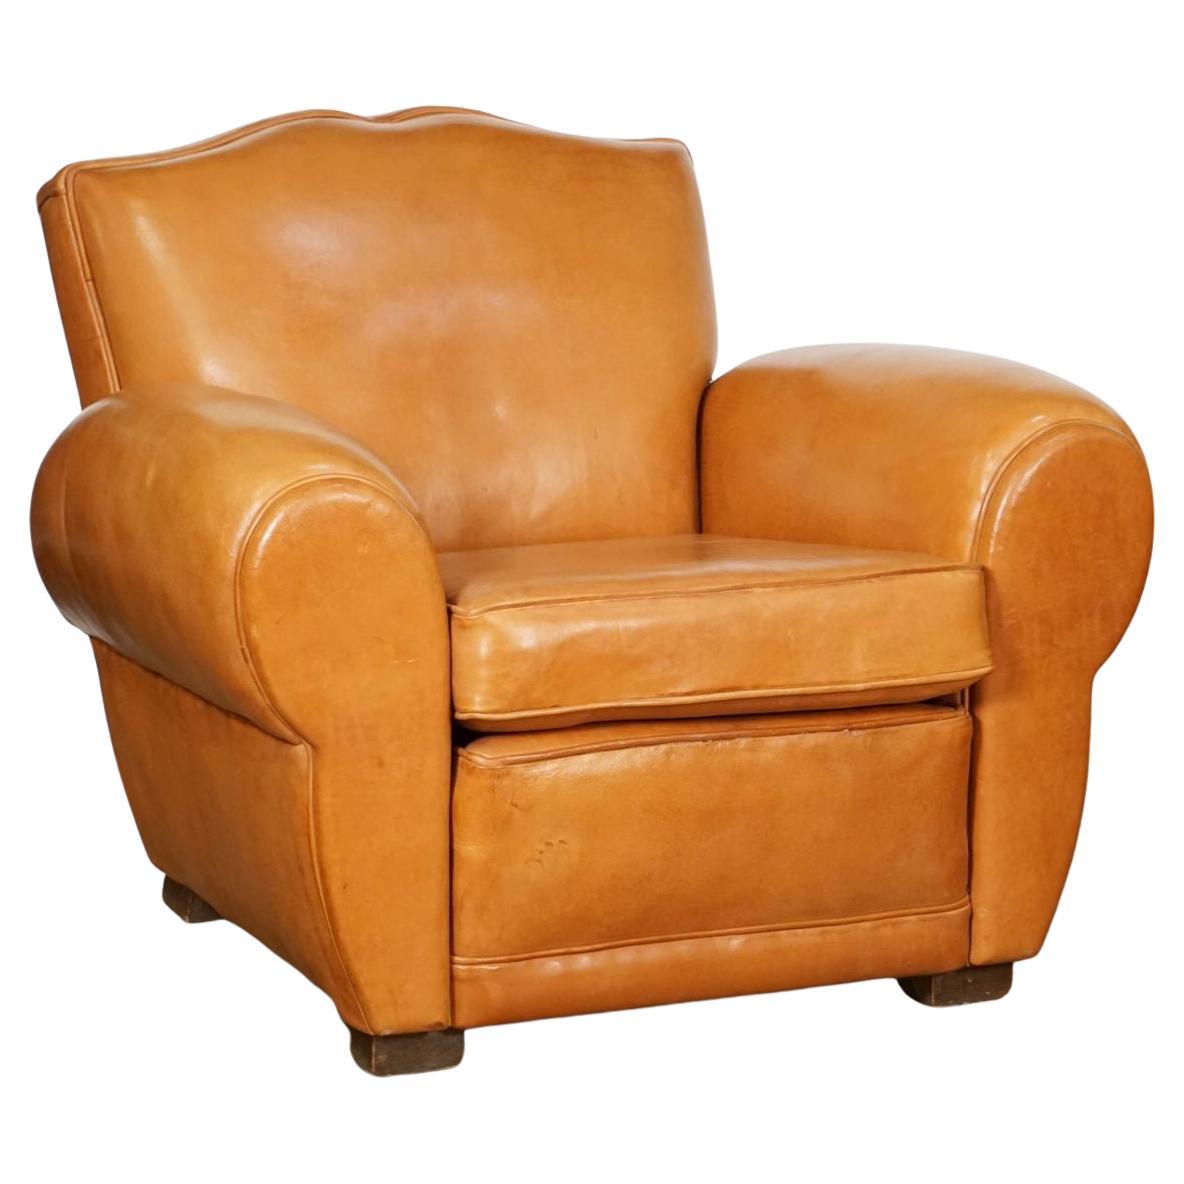 A handsome pair of French club chairs from the Art Deco era, of recently upholstered leather, with beaded trim to the front and sides, nail-head trim round the backs, and cushioned seats, featuring fine lines and deep seating comfort.

Each chair